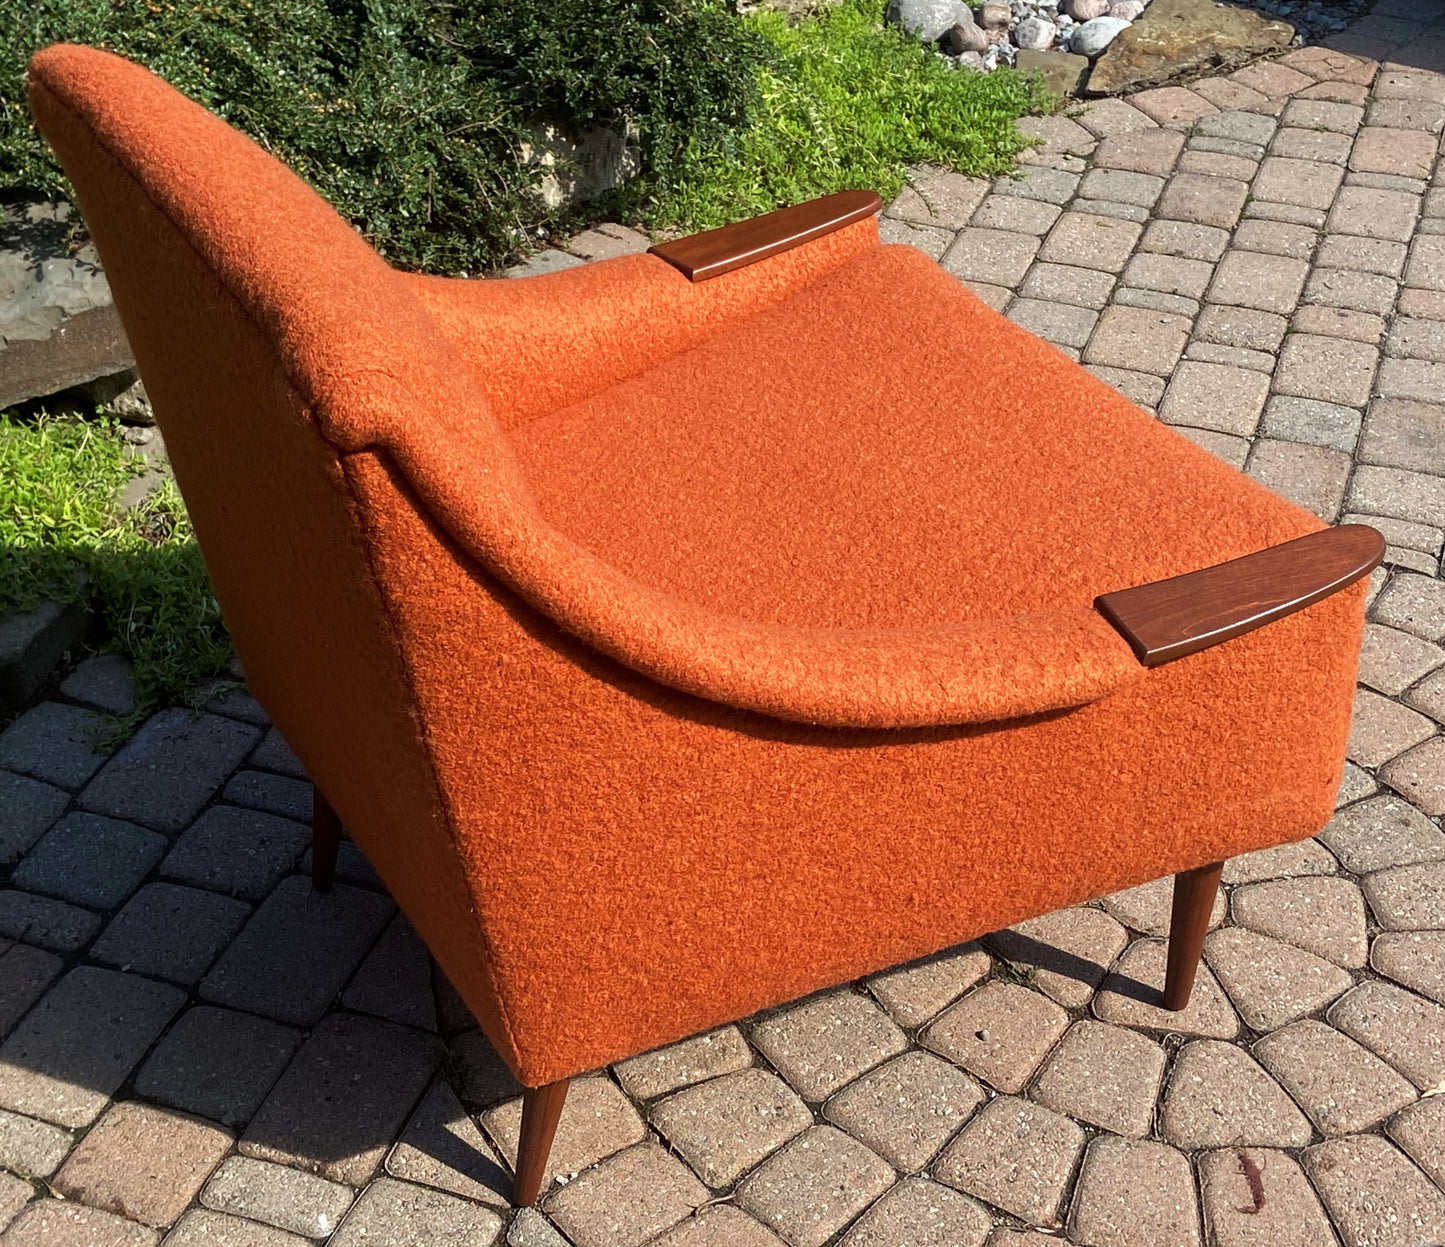 REFINISHED REUPHOLSTERED Mid Century Modern Armchair